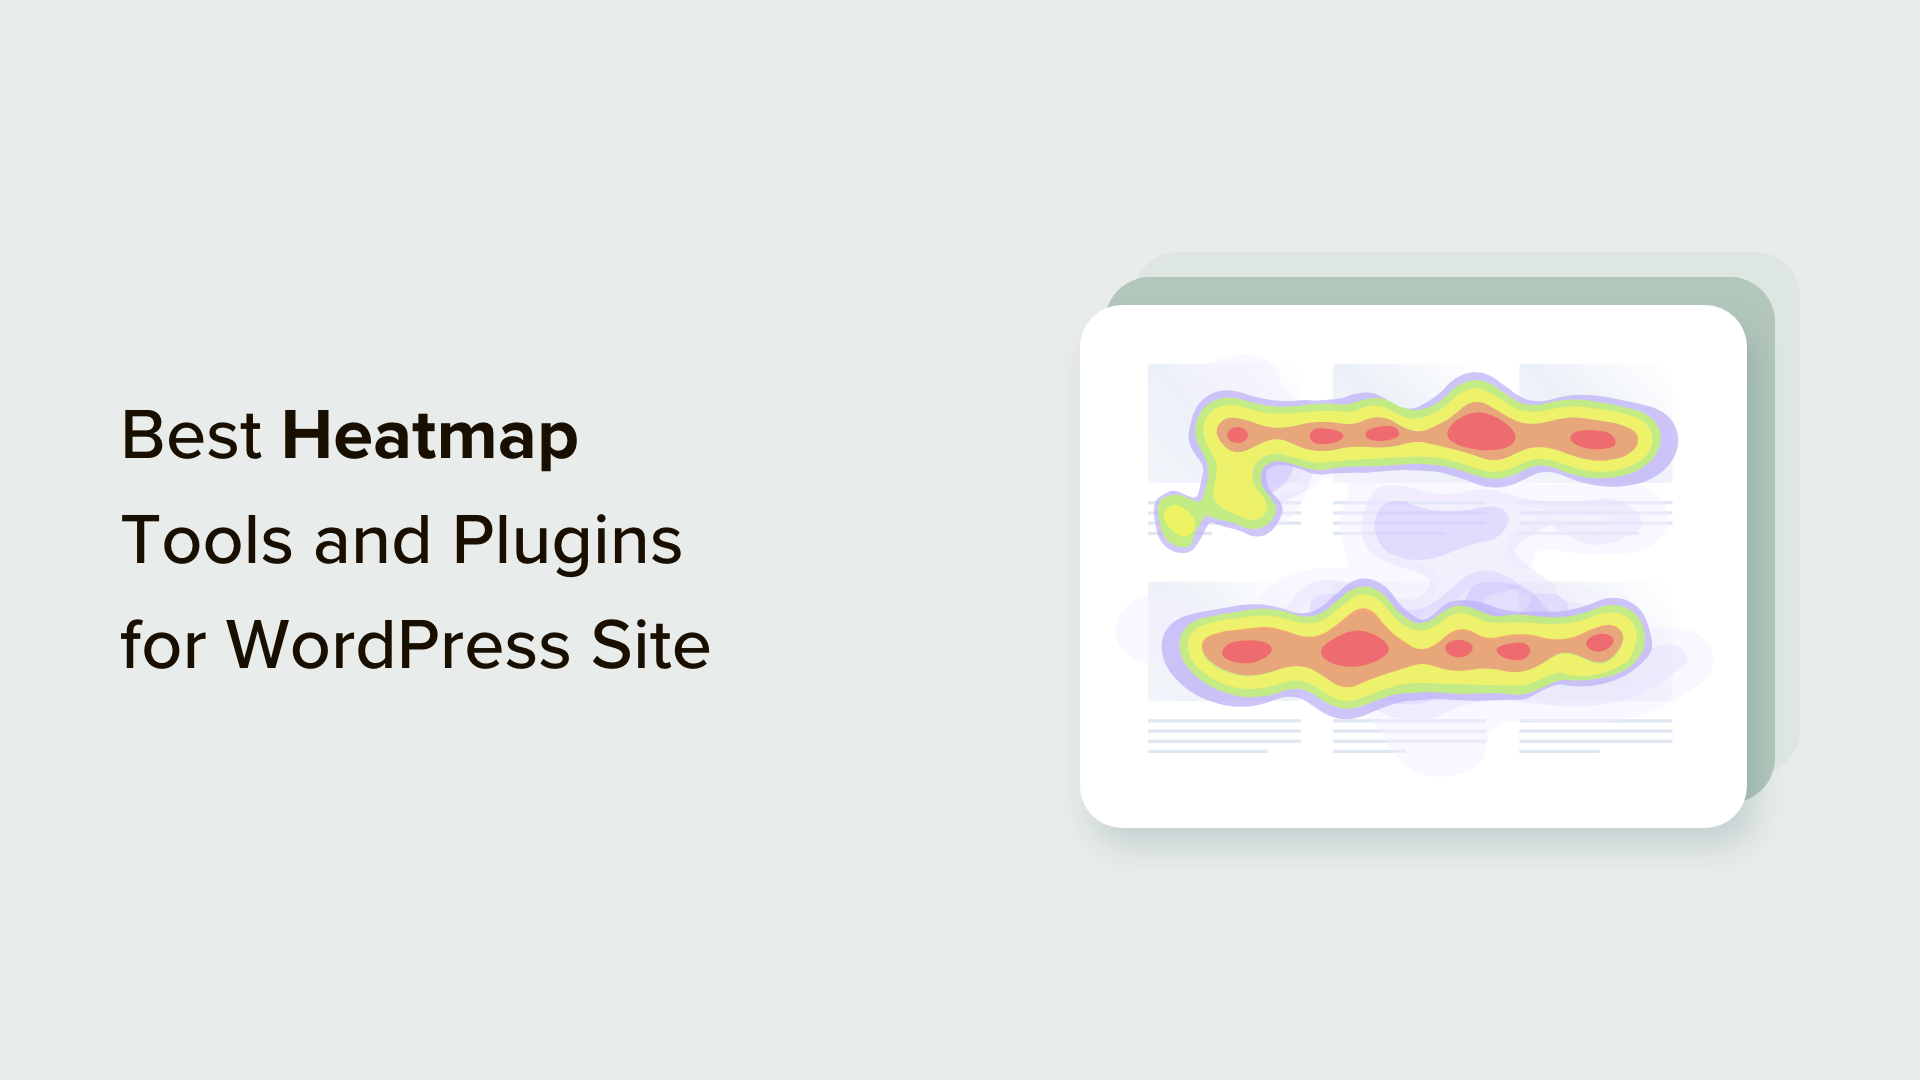 9 Best Heatmap Tools and Plugins for Your WordPress Site